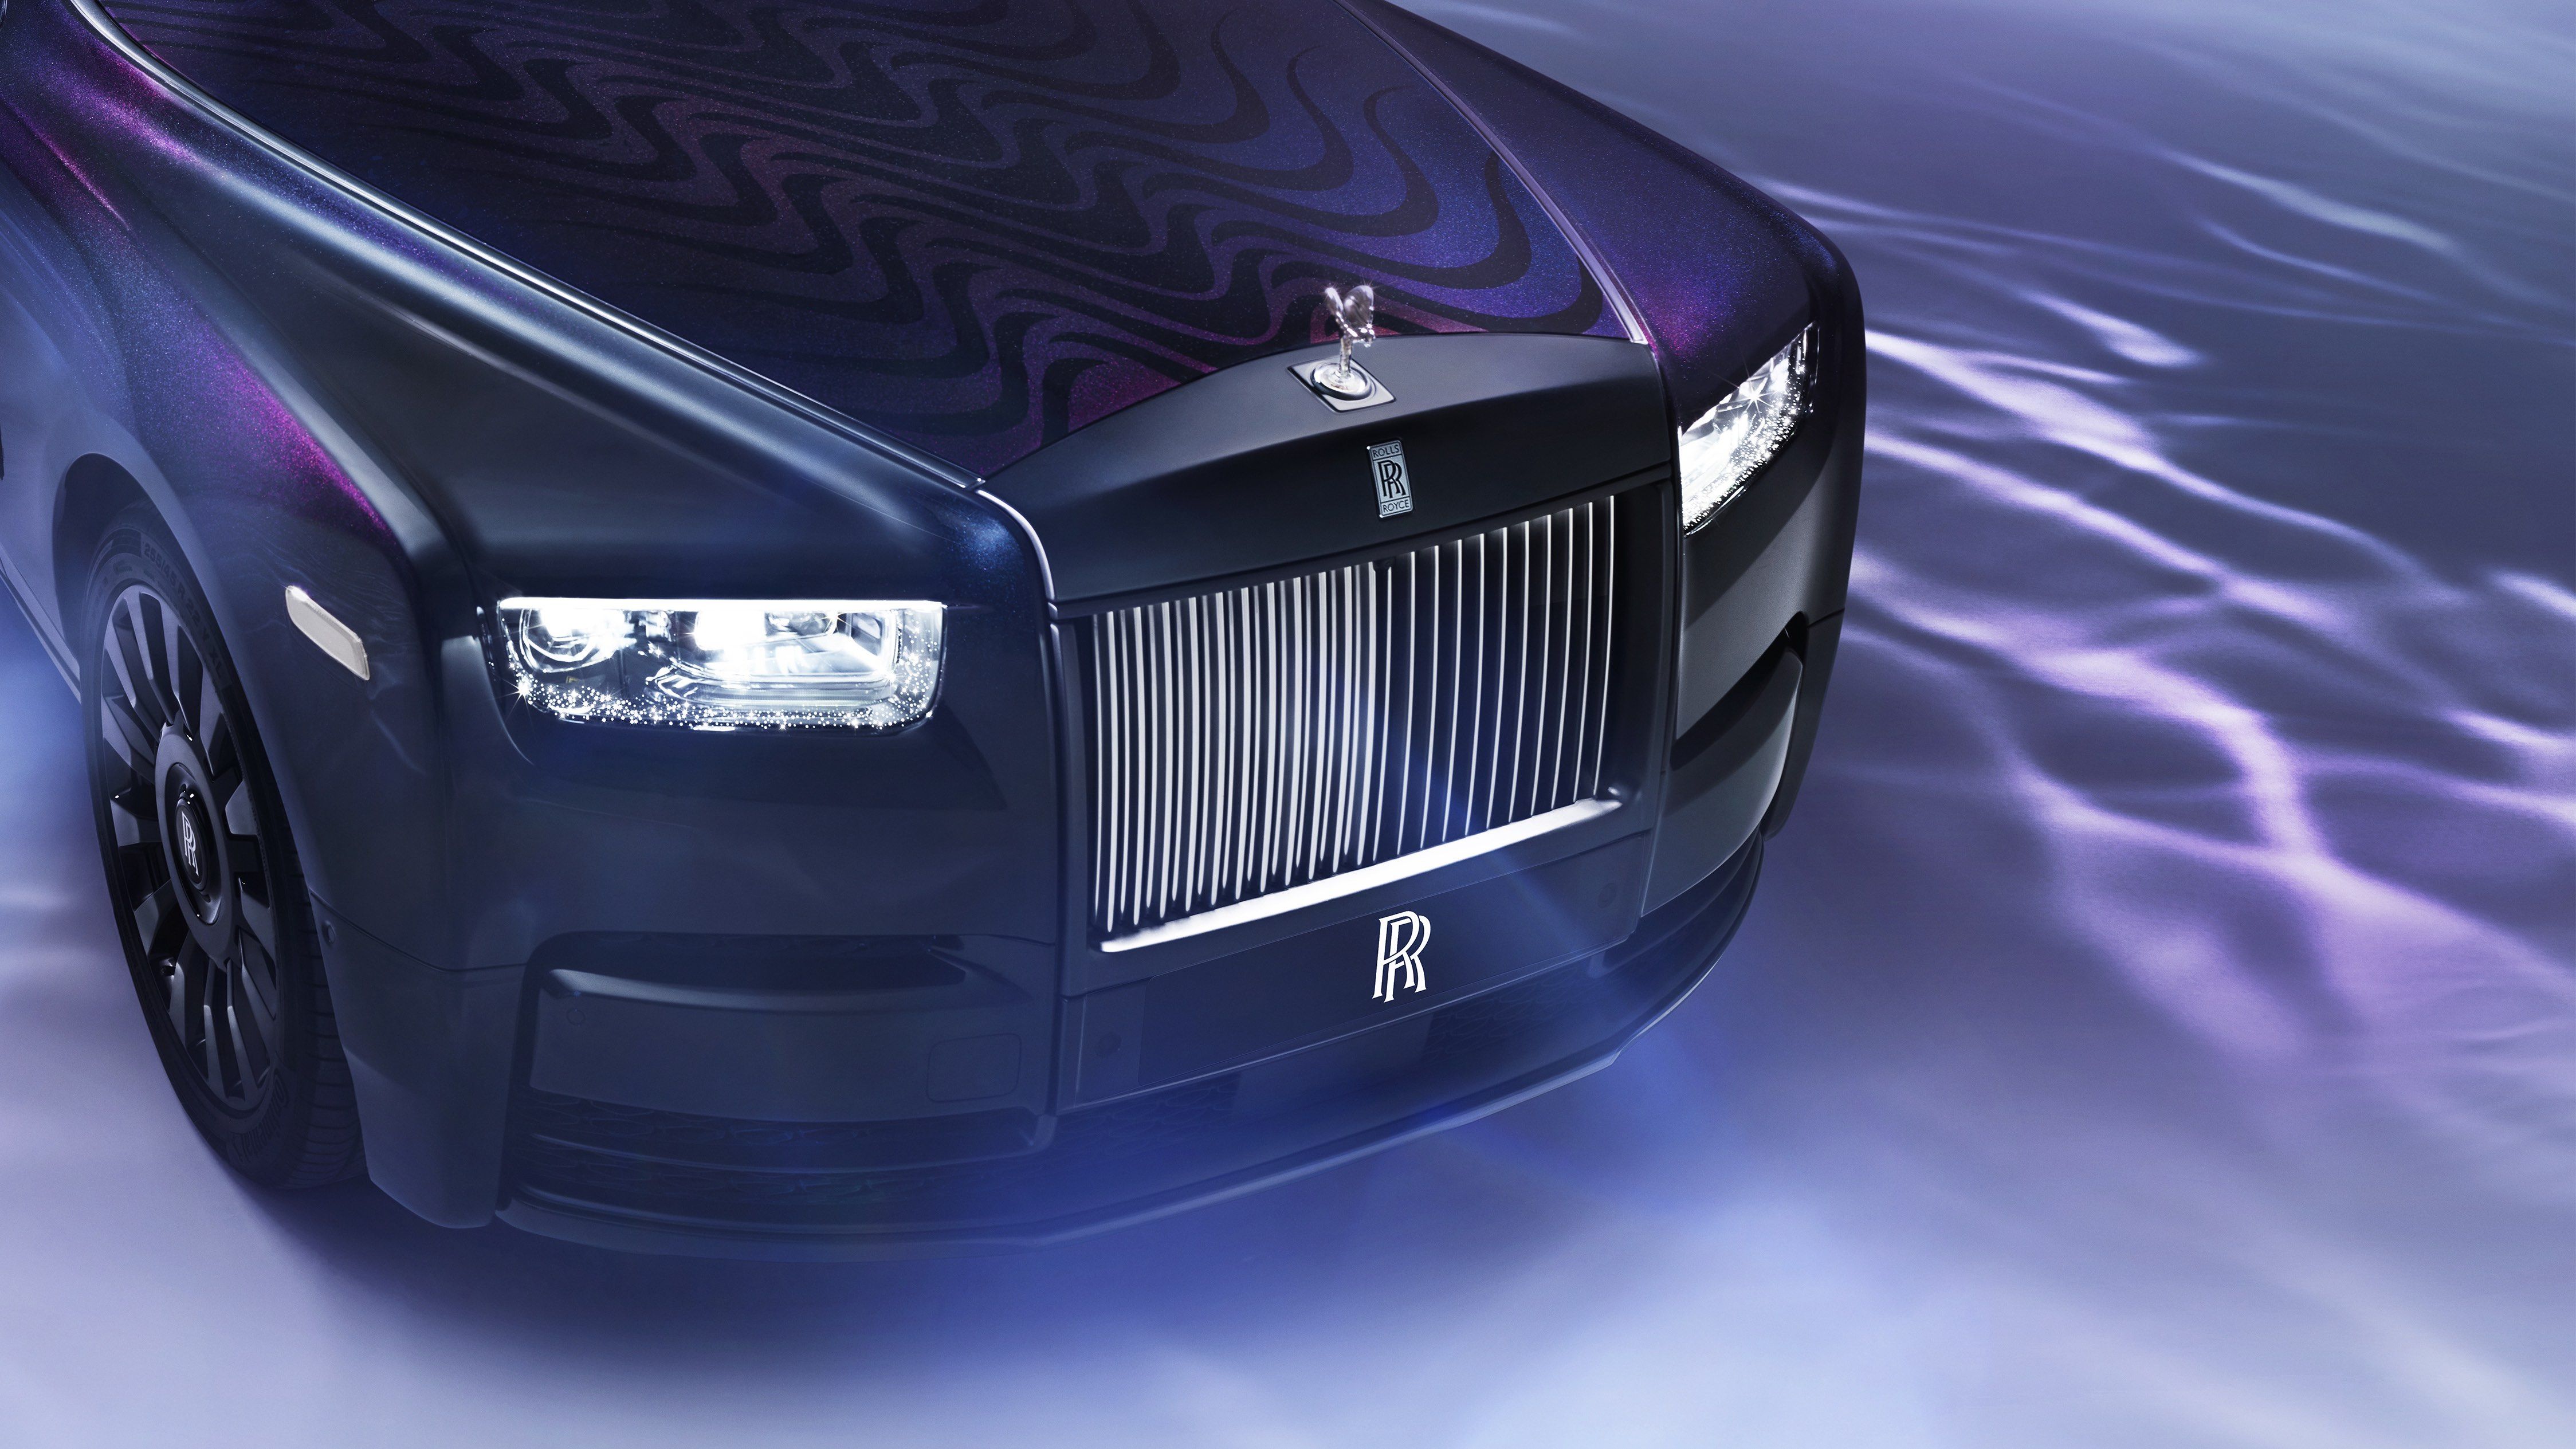 Rolls-Royce Phantom Syntopia Takes Haute Couture to Crazy Levels